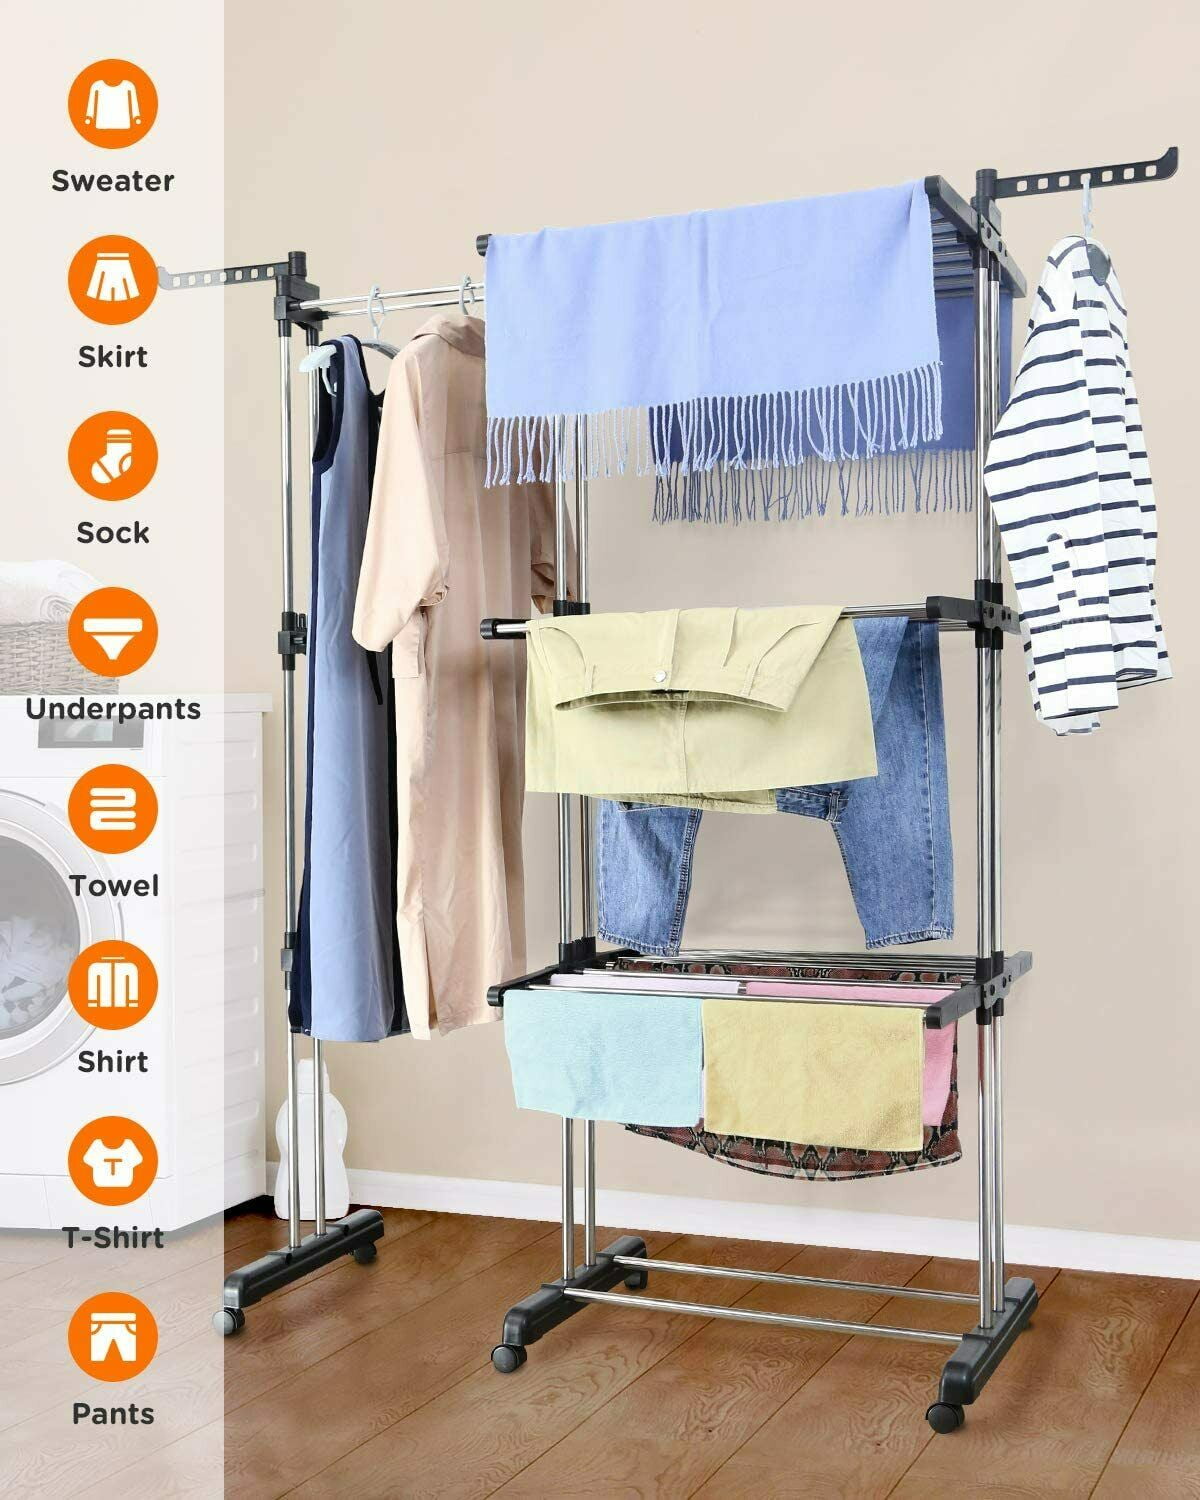 Details about   Clothes Drying Rack for Indoor Outdoor Adjustable Stainless Steel Garment Rack 